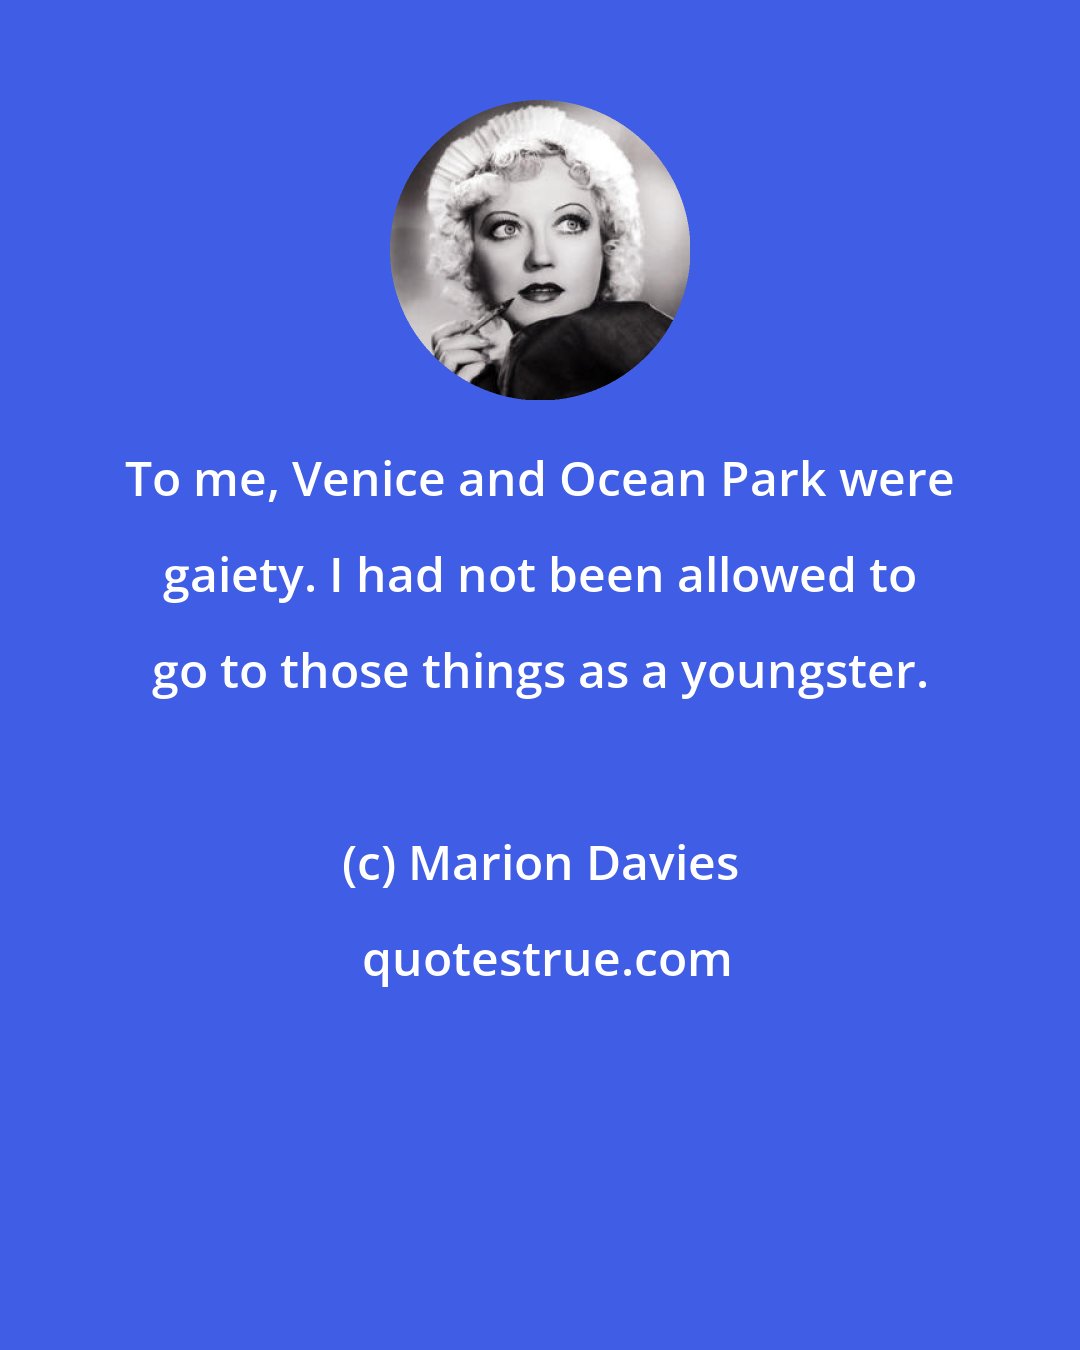 Marion Davies: To me, Venice and Ocean Park were gaiety. I had not been allowed to go to those things as a youngster.